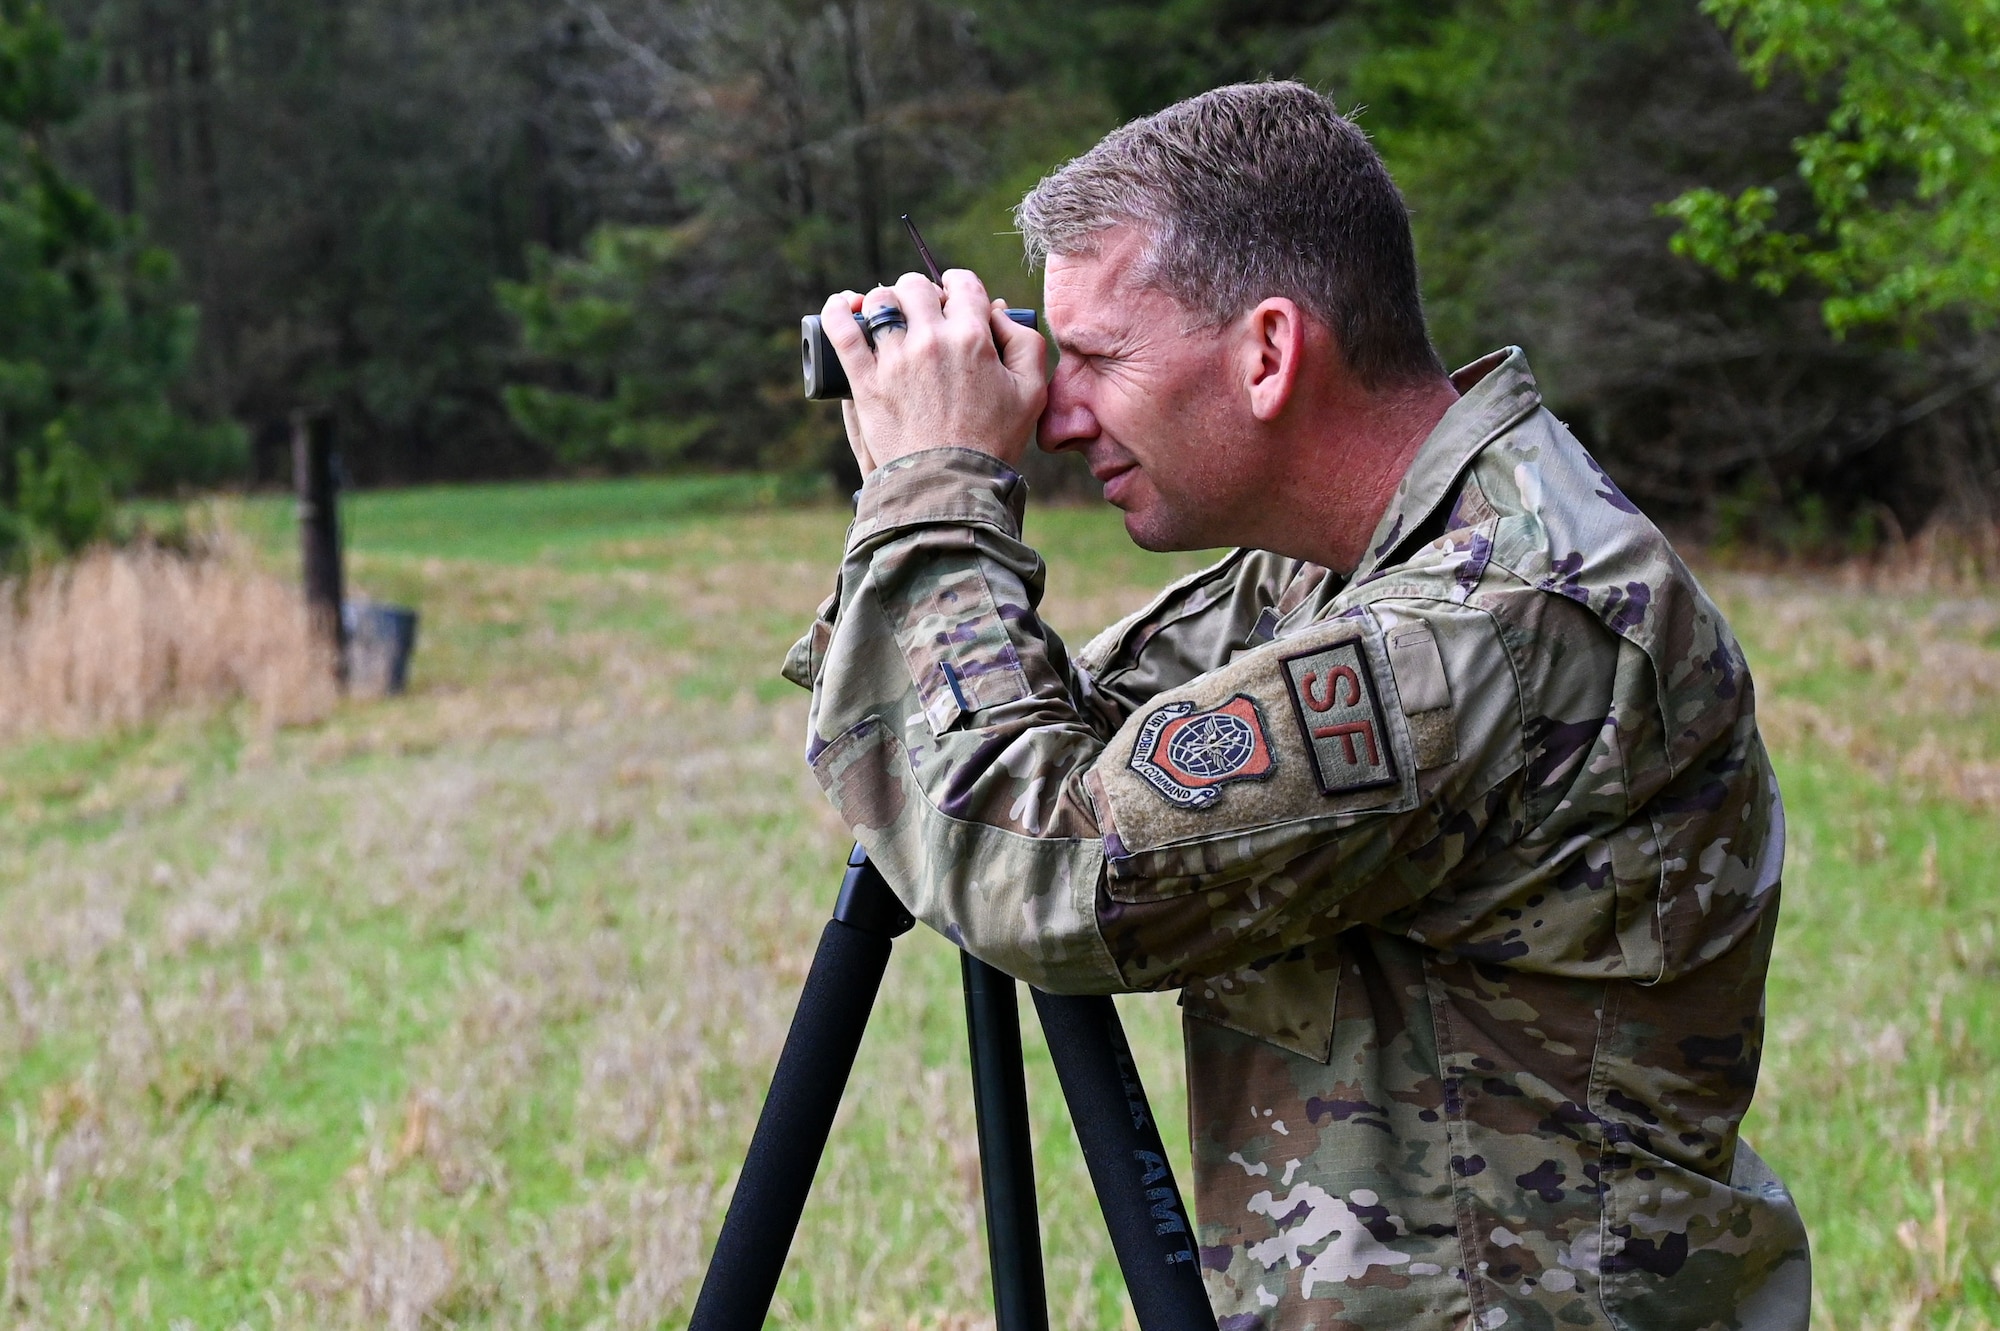 An Airman from the 19th Security Forces Squadron checks targets through a scope during an Advanced Designated Marksman course